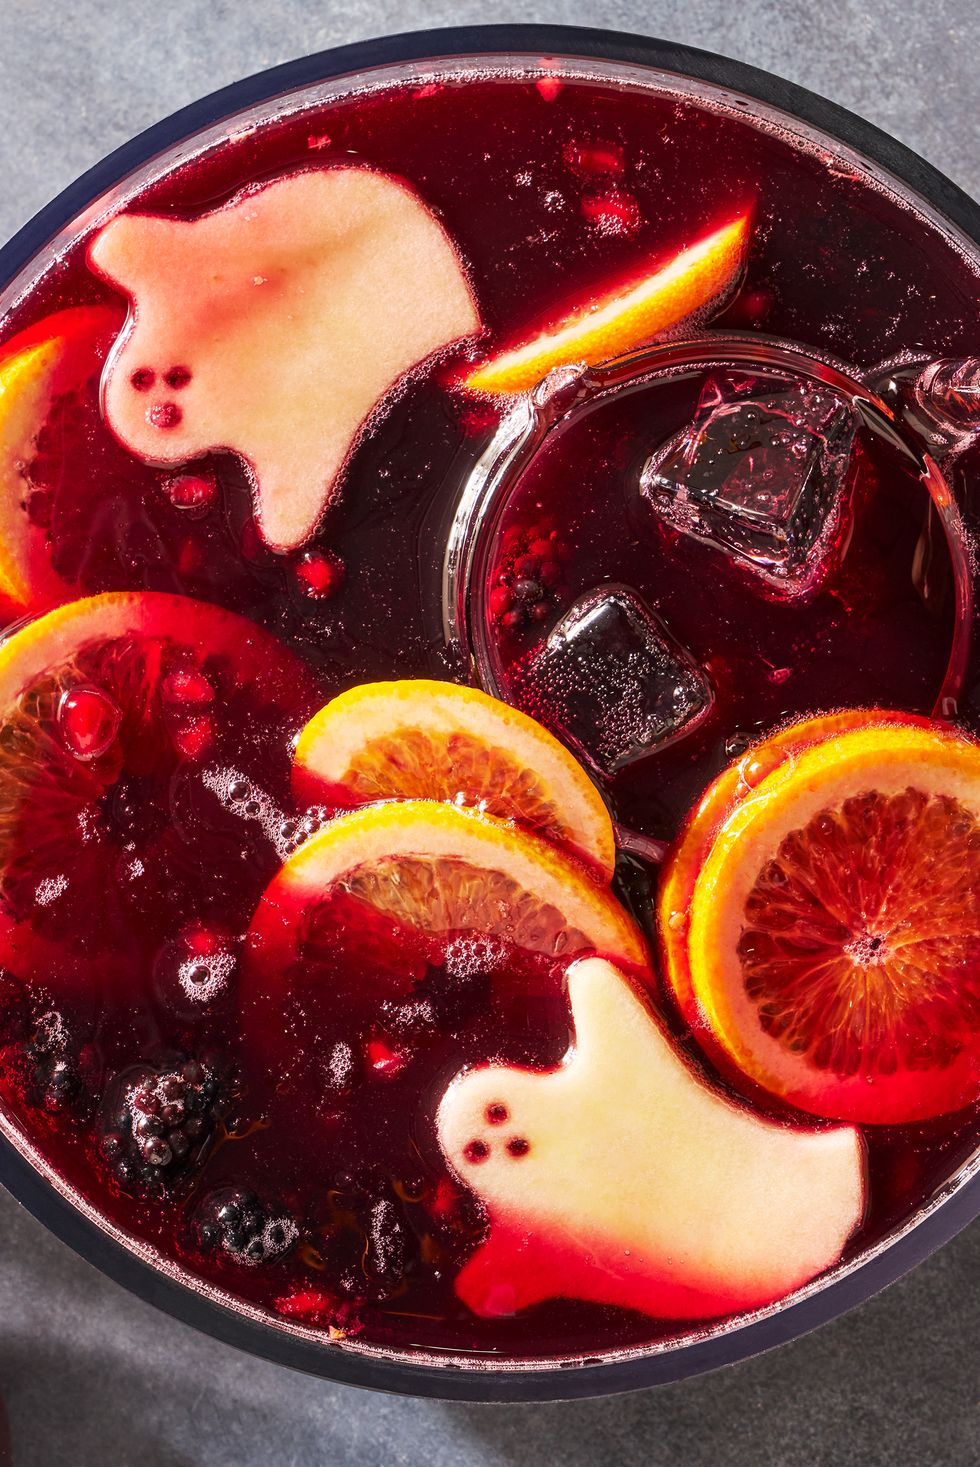 a bowl of red wine based punch with ice cubes, blackberries, pomegranate seeds, and green apple slices cut to resemble ghosts